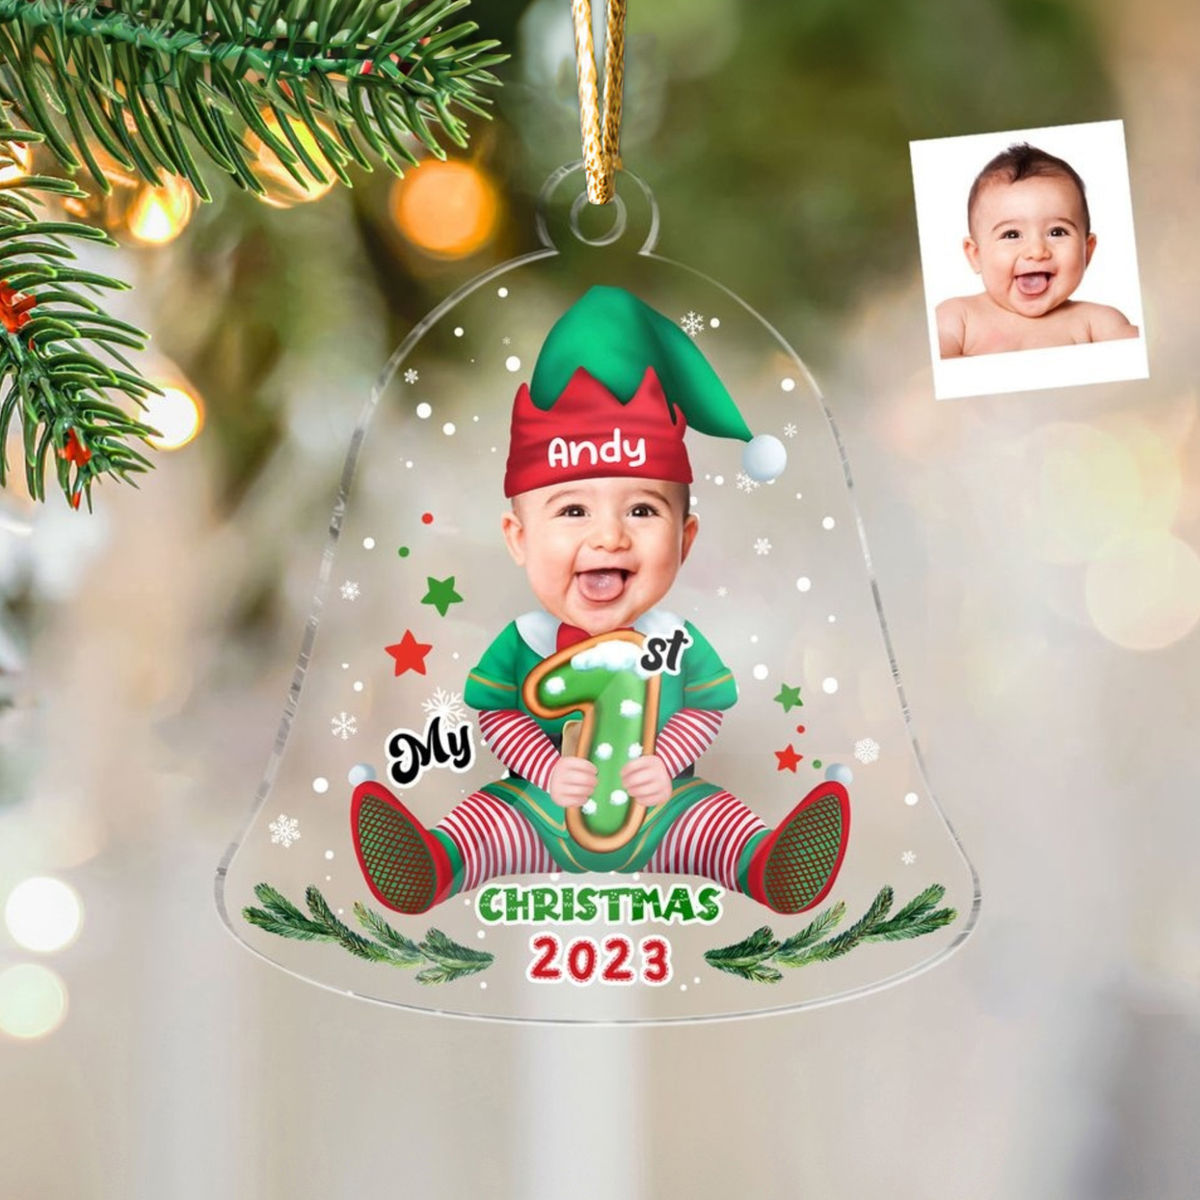 Christmas Gifts - Customized Your Photo Ornament - Christmas Bell Elf Baby - My First Christmas 2023